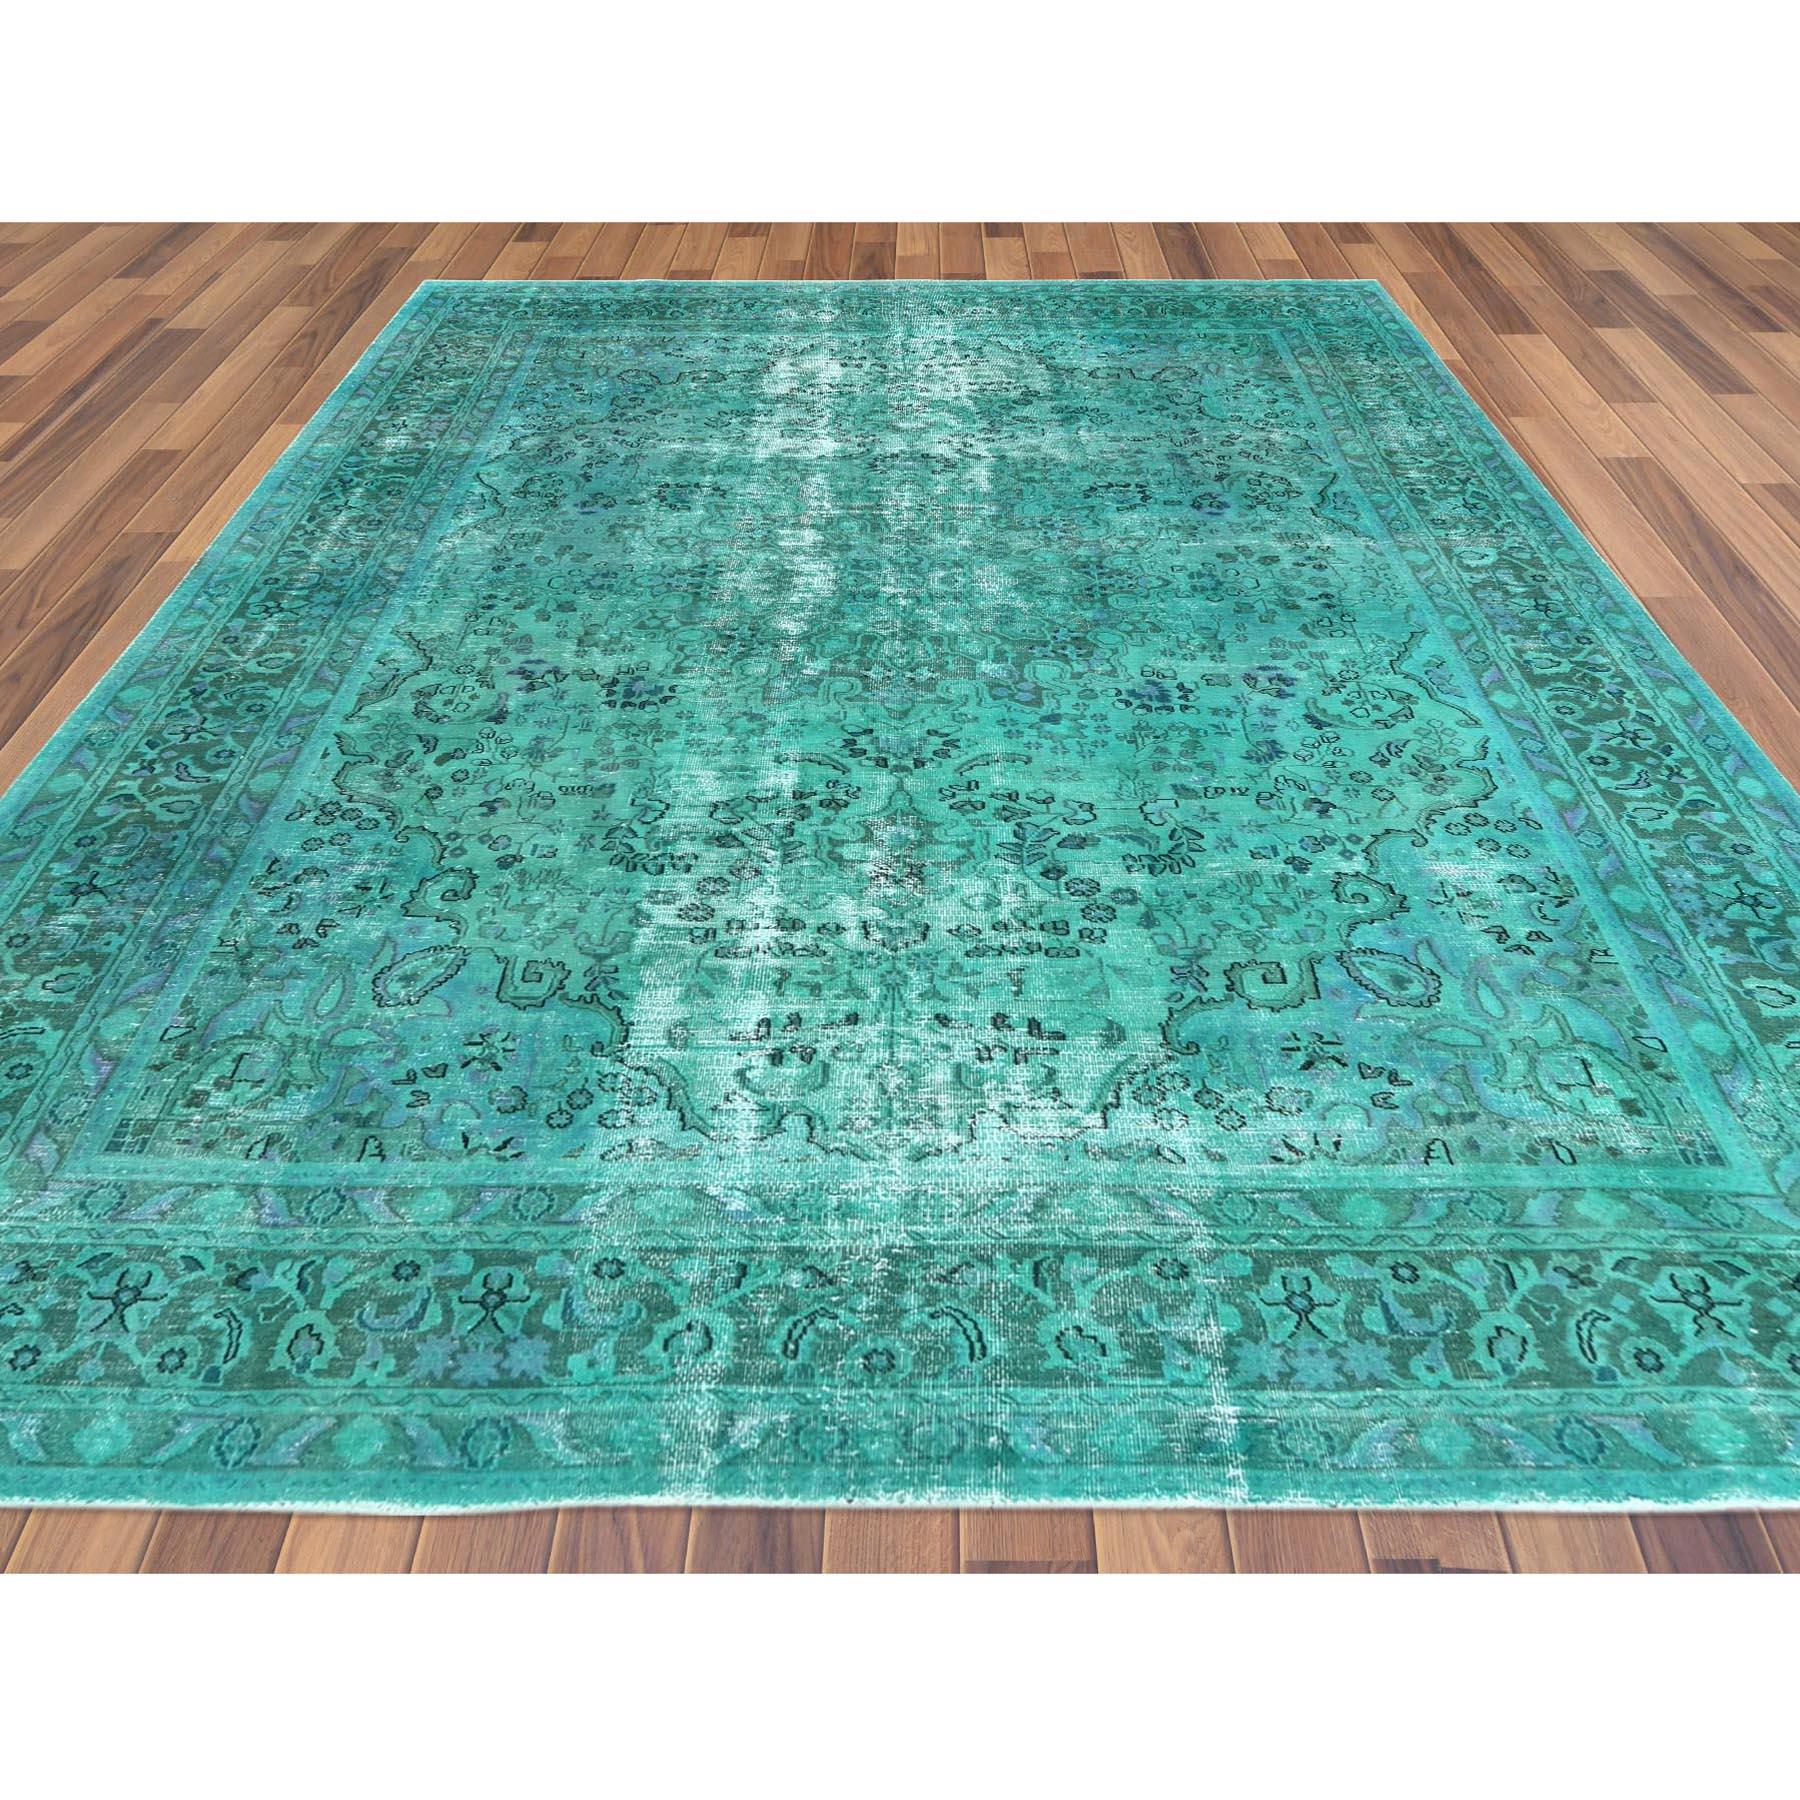 Hand-Knotted Teal Green Vintage Overdyed Persian Tabriz Distressed Worn Wool Hand Knotted Rug